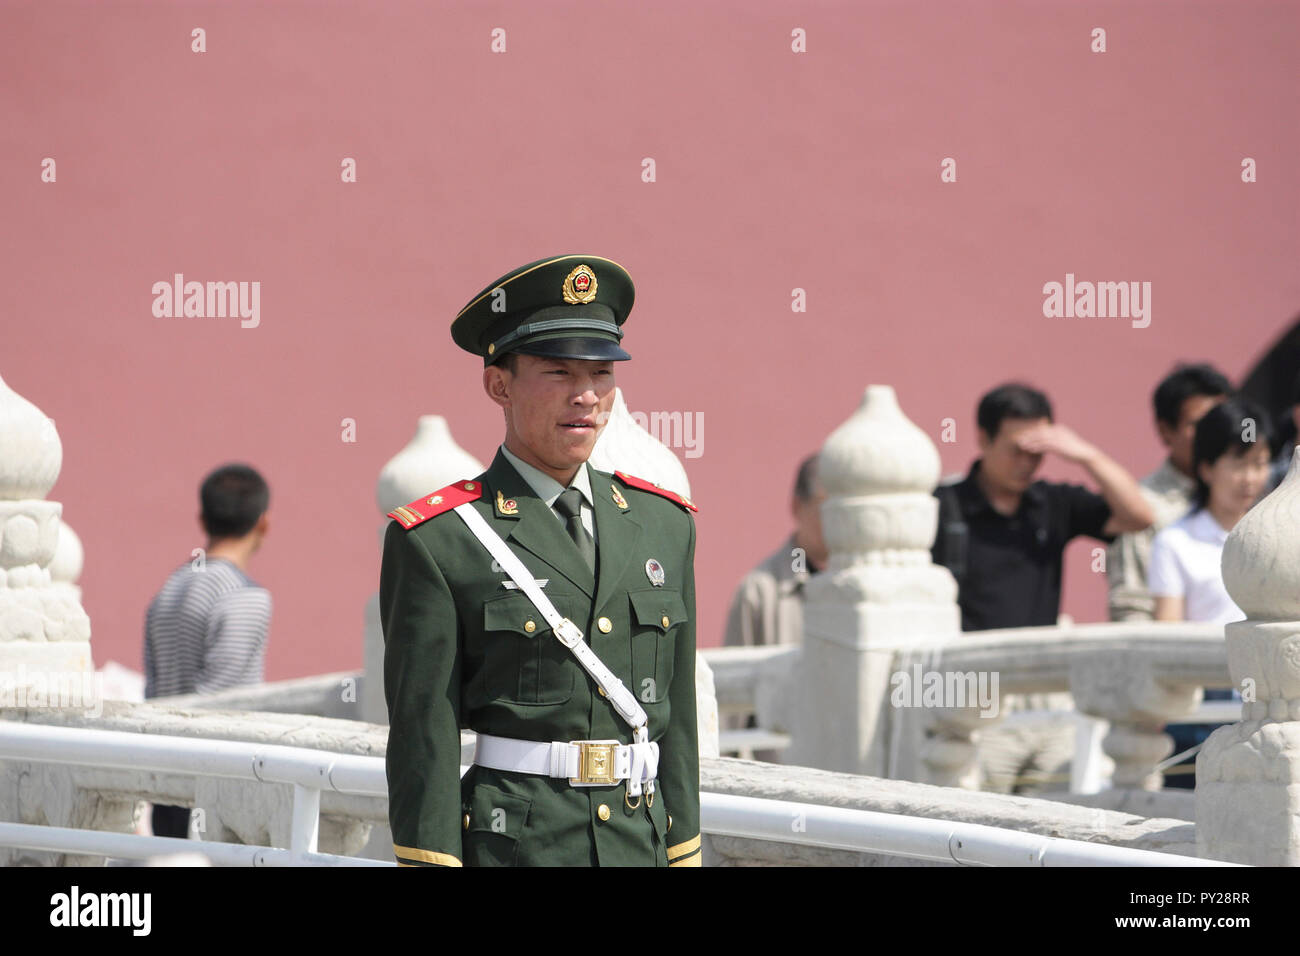 Chinese soldier on duty in front of The Forbidden City during 60th anniversary of the founding of The People's Republic Of China, Beijing, China 2009 Stock Photo